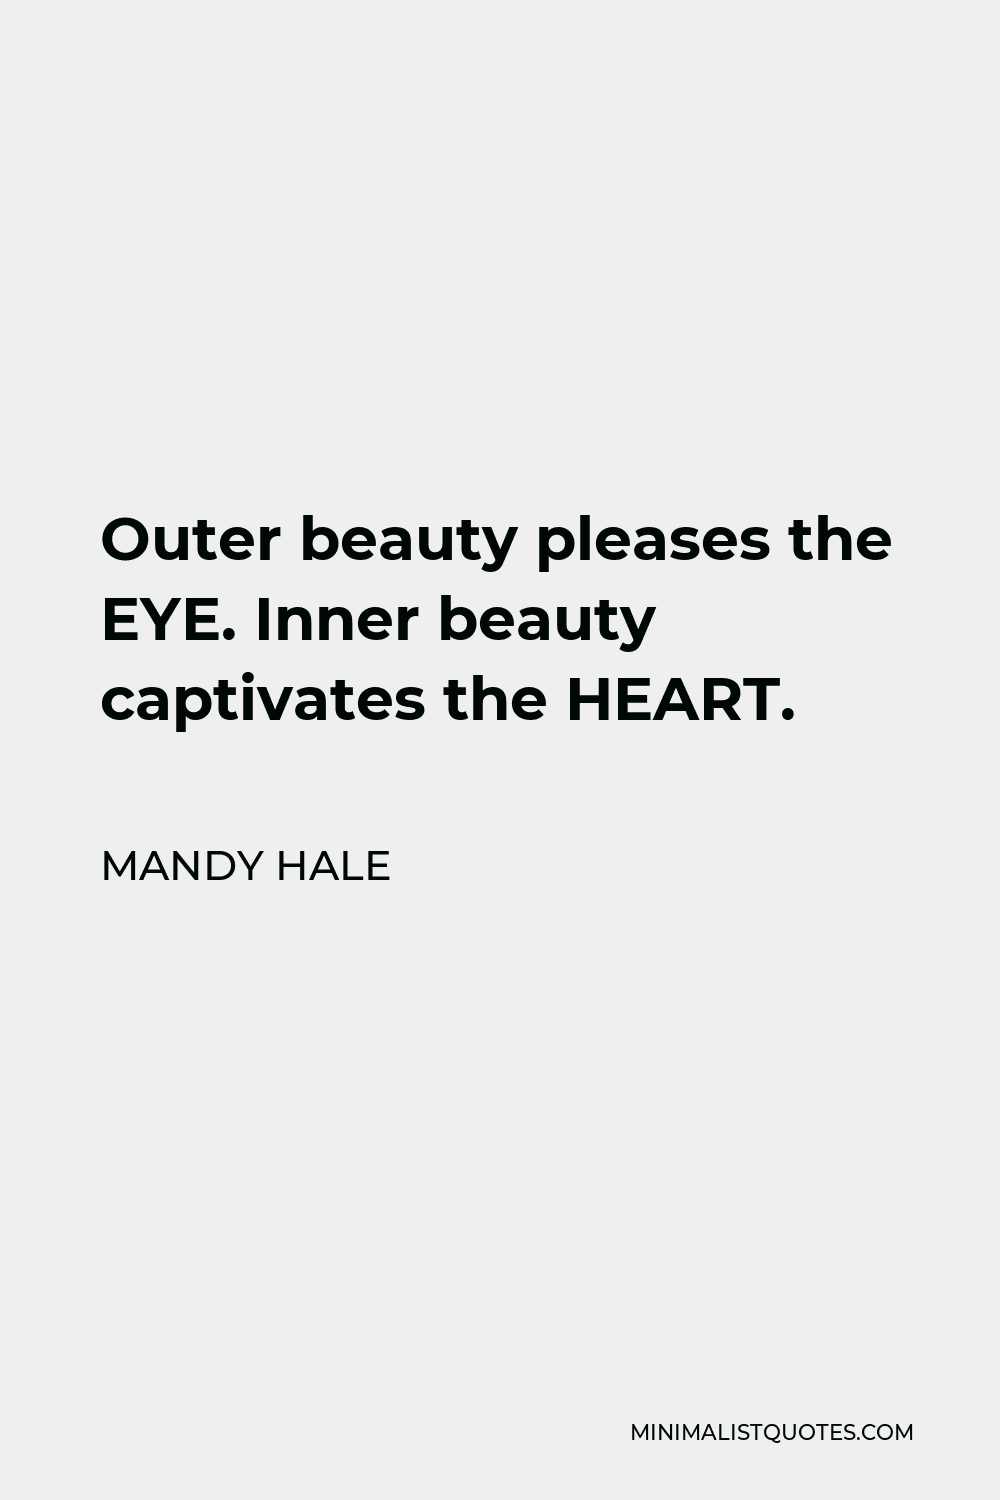 Mandy Hale Quote - Outer beauty pleases the EYE. Inner beauty captivates the HEART.